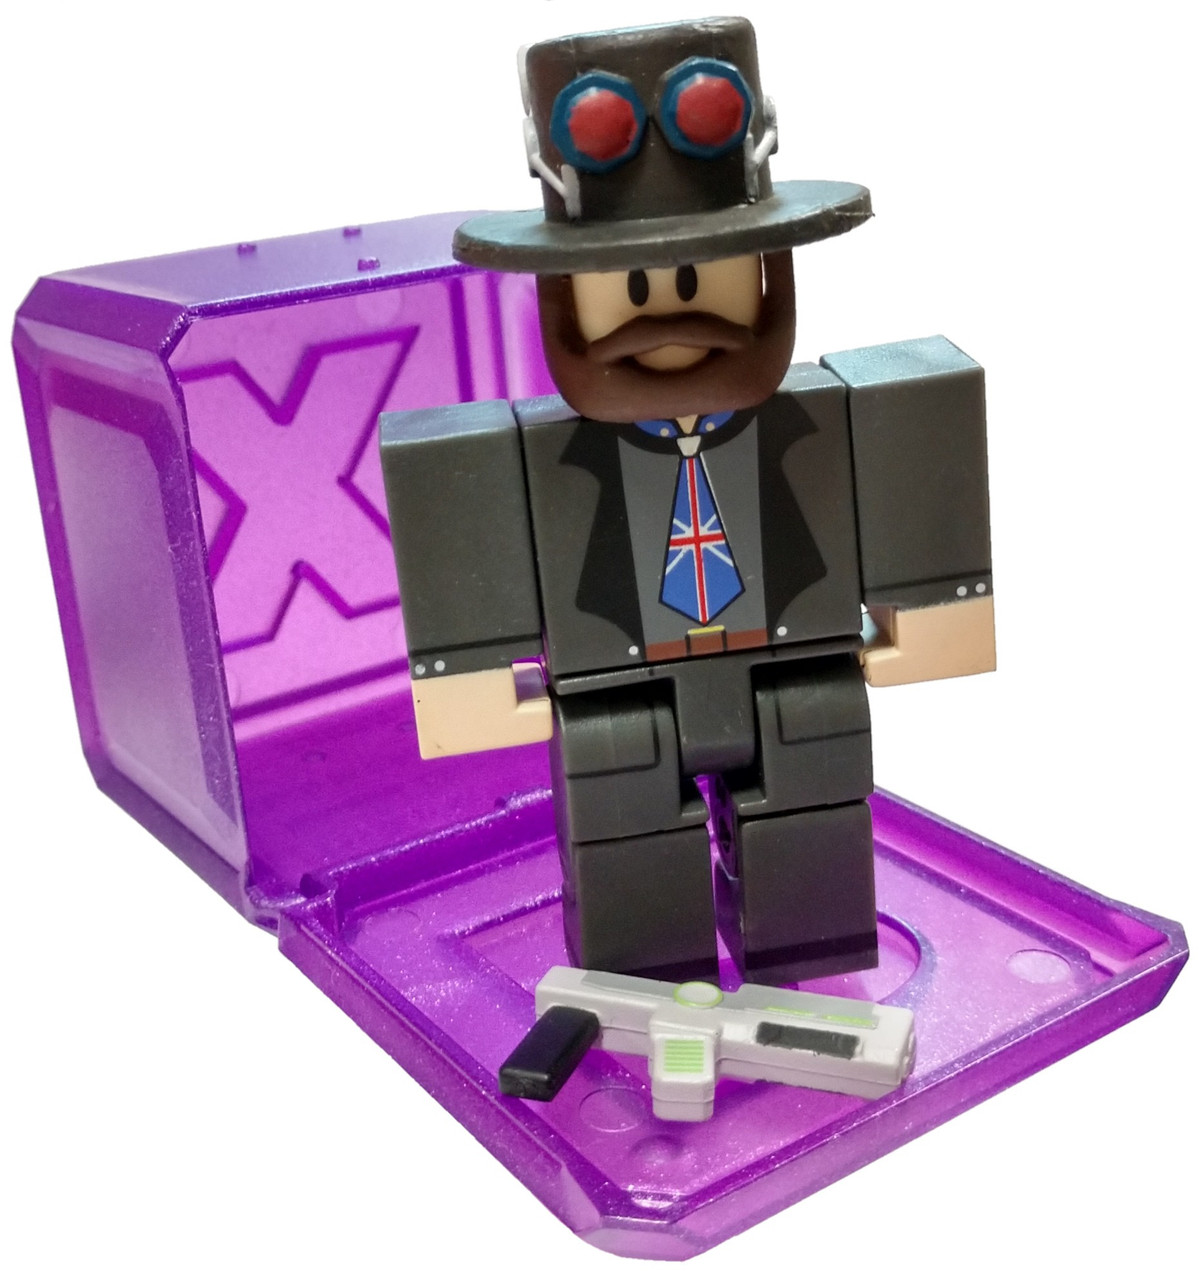 Roblox Celebrity Collection Series 3 Rolijok 3 Mini Figure With Cube And Online Code Loose Jazwares Toywiz - details about roblox celebrity collection series 3 mystery pack purple cube